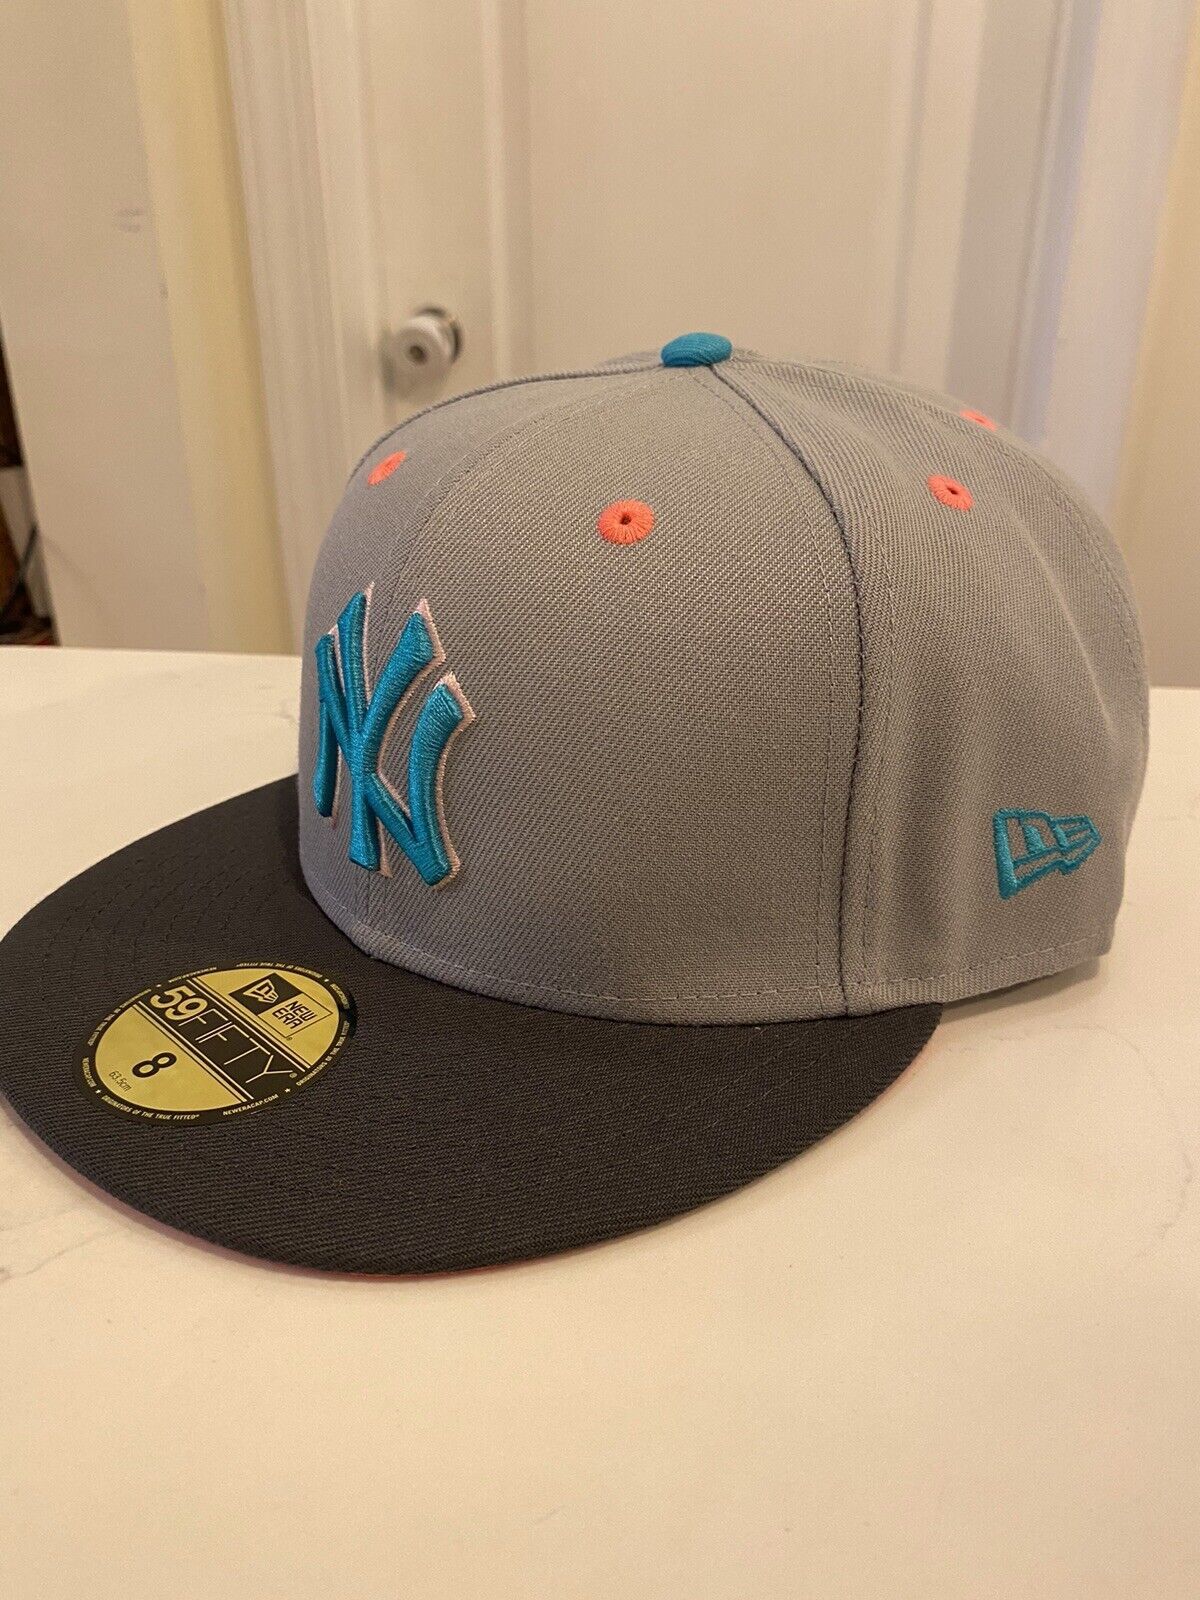 New Era 59Fifty NEW YORK YANKEES Fitted Hat Subway Series Gray 2-Tone  Pink UV